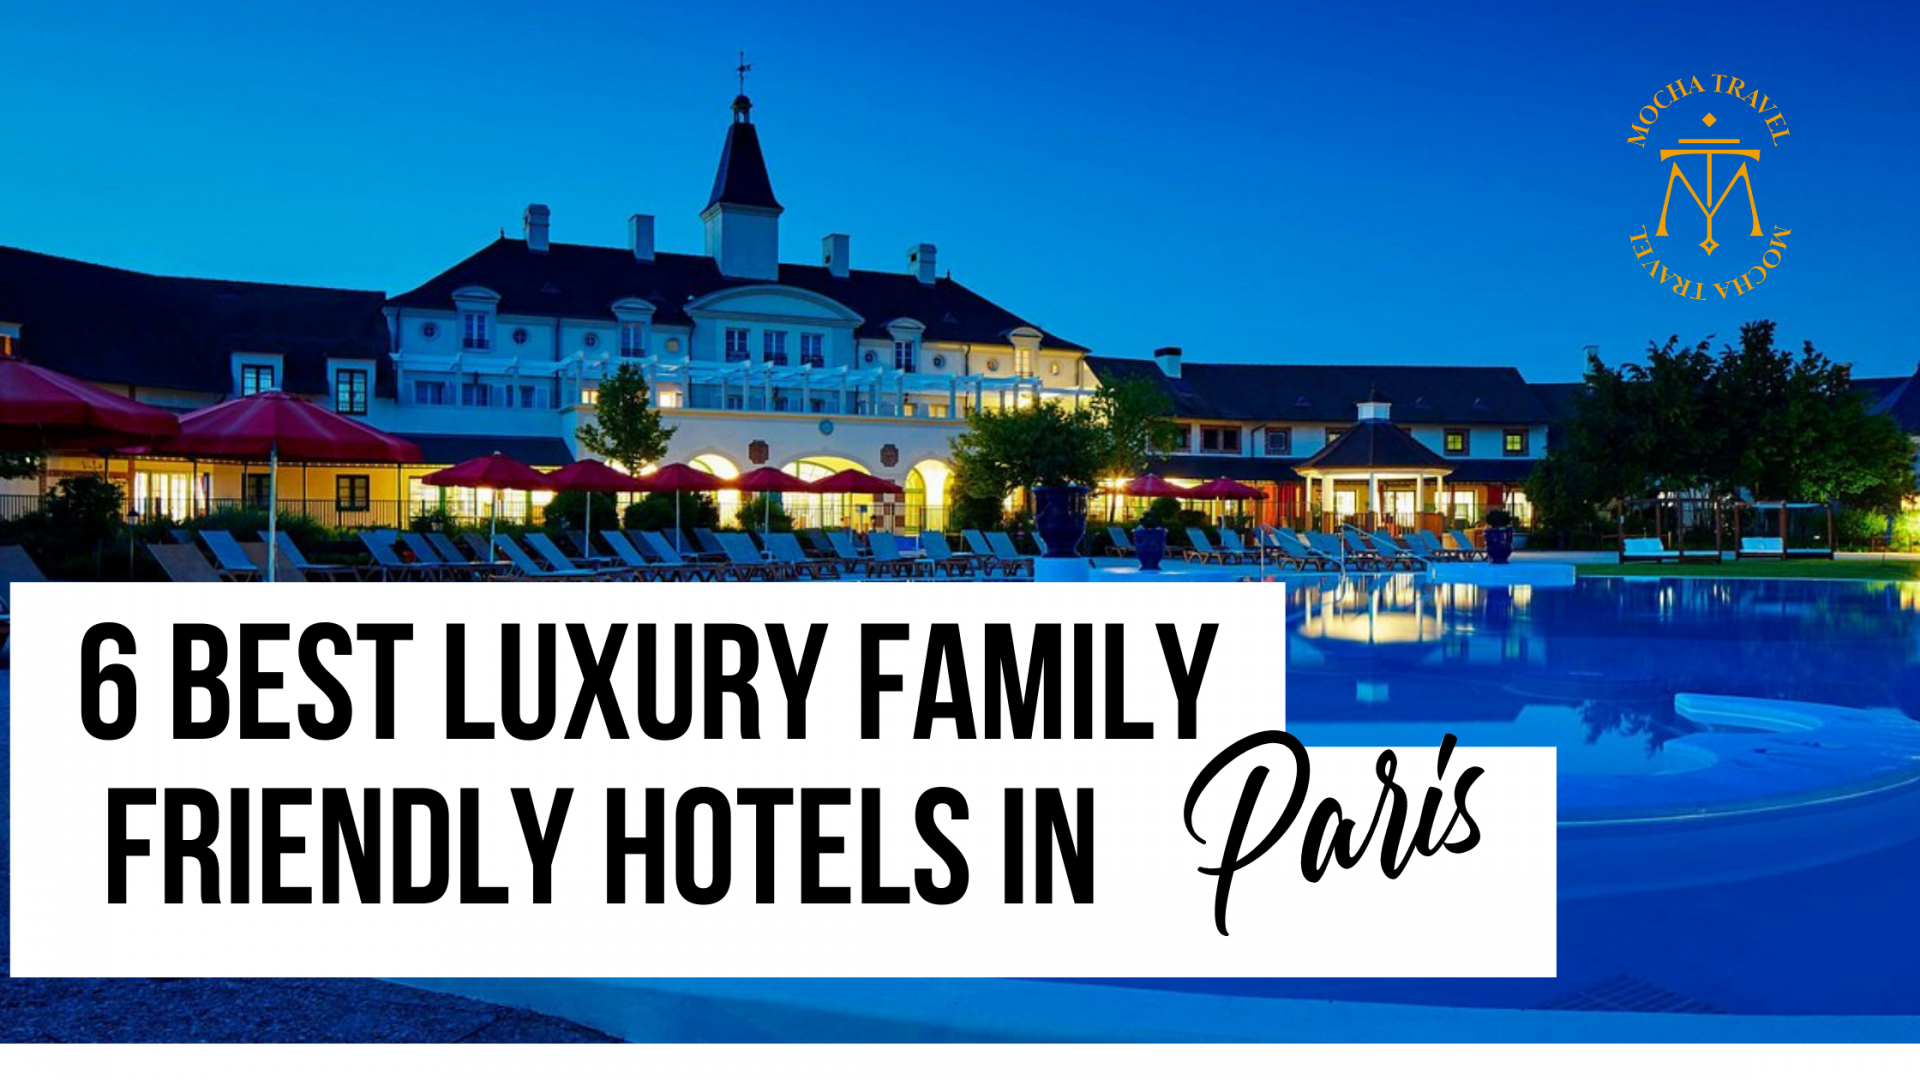 Luxury hotels for families